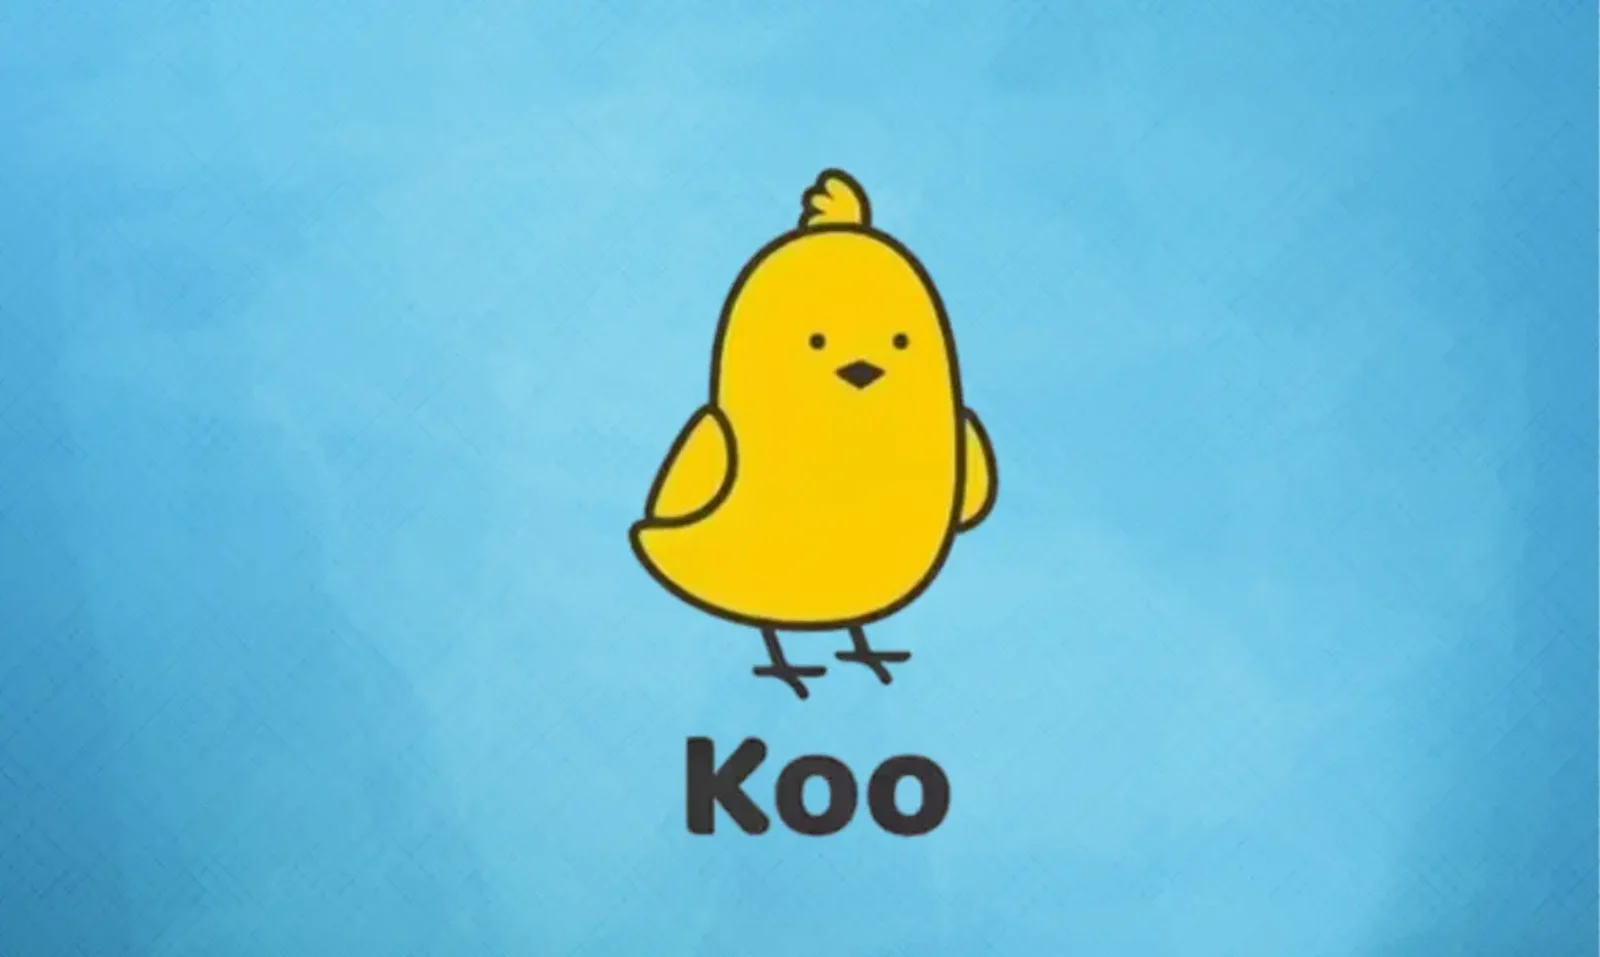 Koo, Radhakrishna, Twitter, Koo Shutting Down, Dailyhunt, Koo Twitter, Twitter Koo, Sharechat, social media, news, financing, startups, tech, media, genera, koo shutdown, media, baked beans, cute, app, gonoodle, twitter, prince Andrew, bts, spectro, india, demos, boo, falcons, food, wellington, microblogging platform, X, Twitter, acquisition, negotiation, business, conglomerates, local language, co-founders, development, prominence, Indian government, linguistic, dominance, social media sites, big impression, active users, MAUs, monthly active users, bigger media, high cost, media outlets, user-generated content, UGC, app running, operations, business, native languages, social conversations, digital, public good,